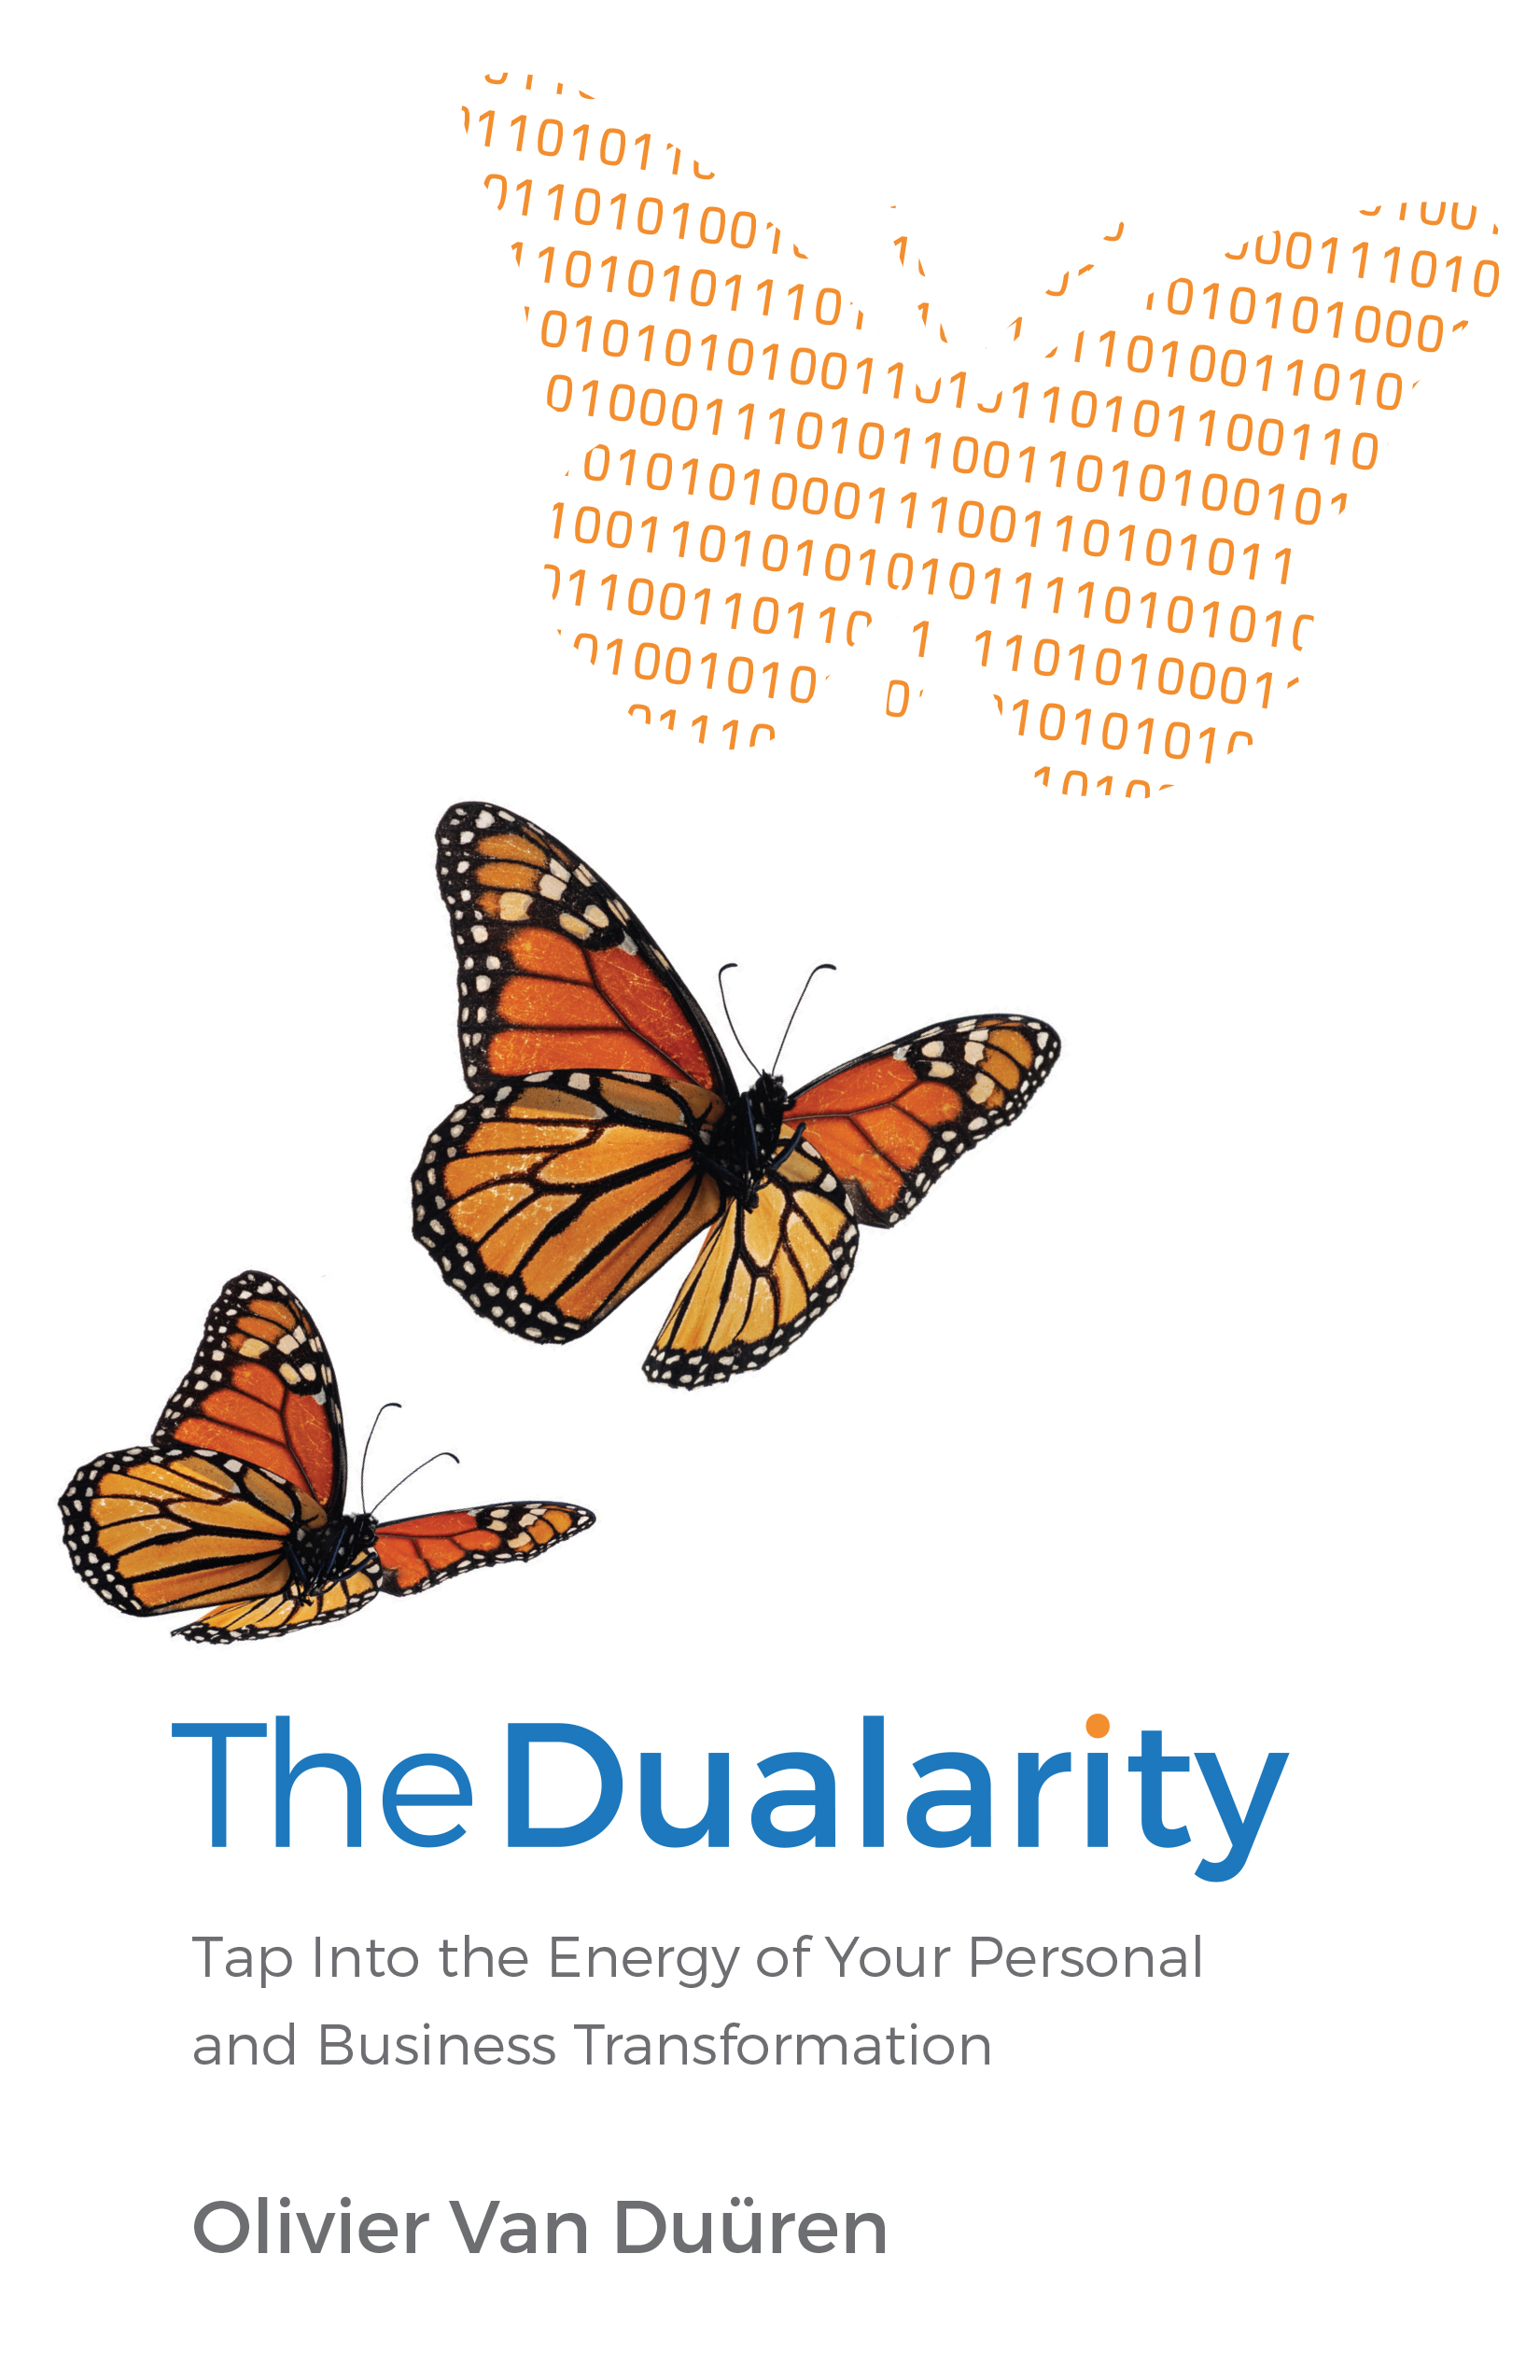 The dualarity book